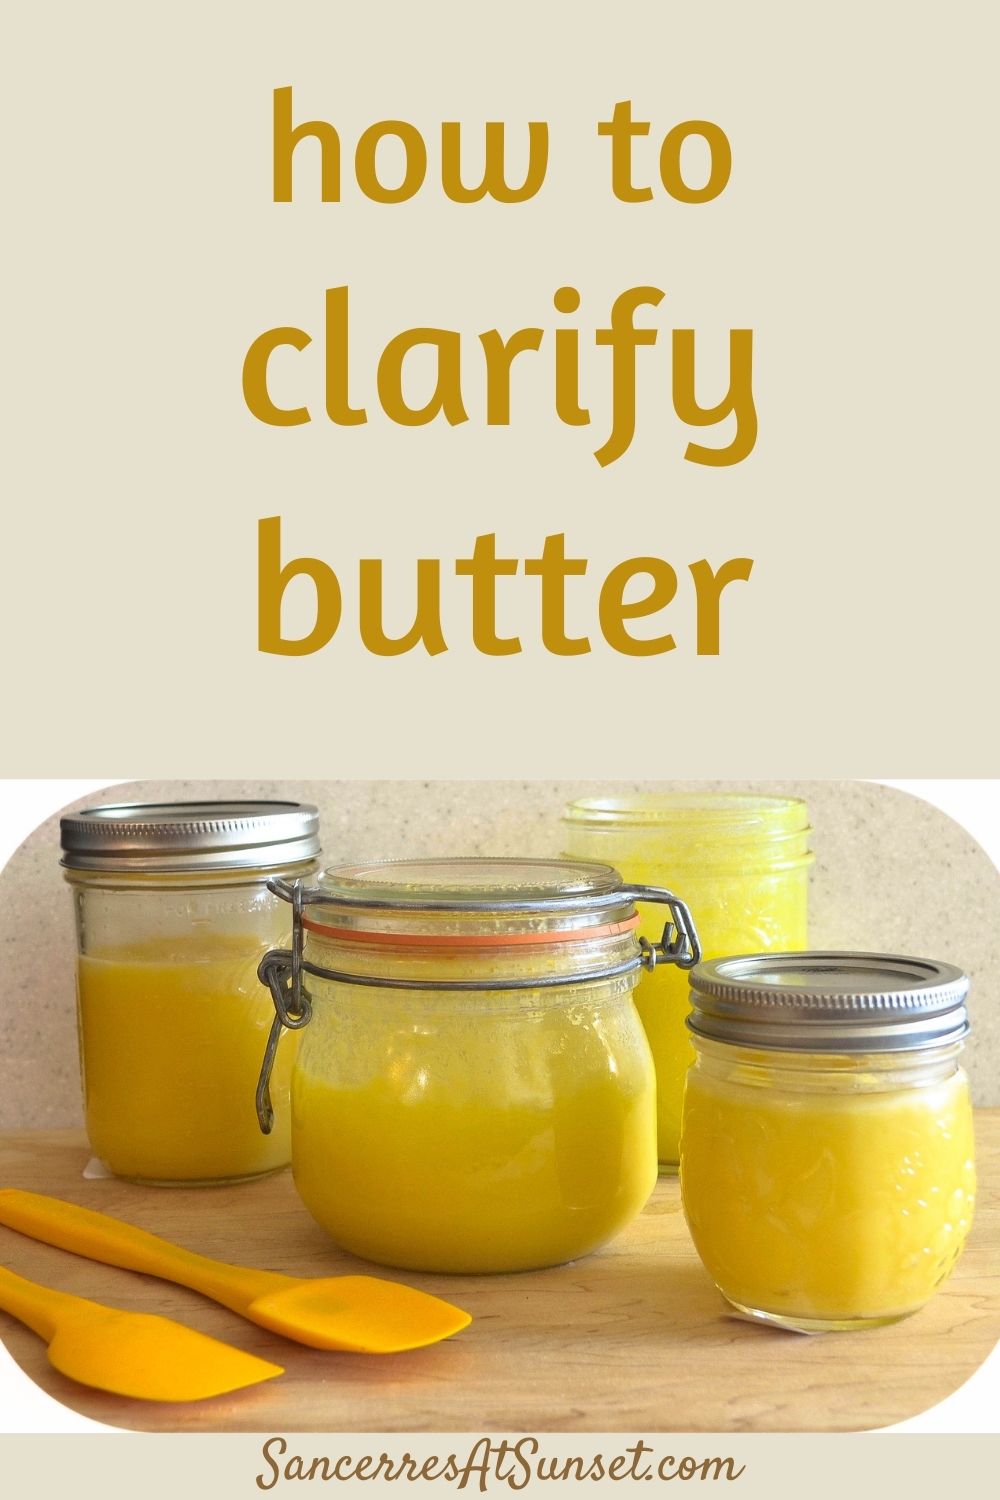 How to Make Clarified Butter, from 4 cultures